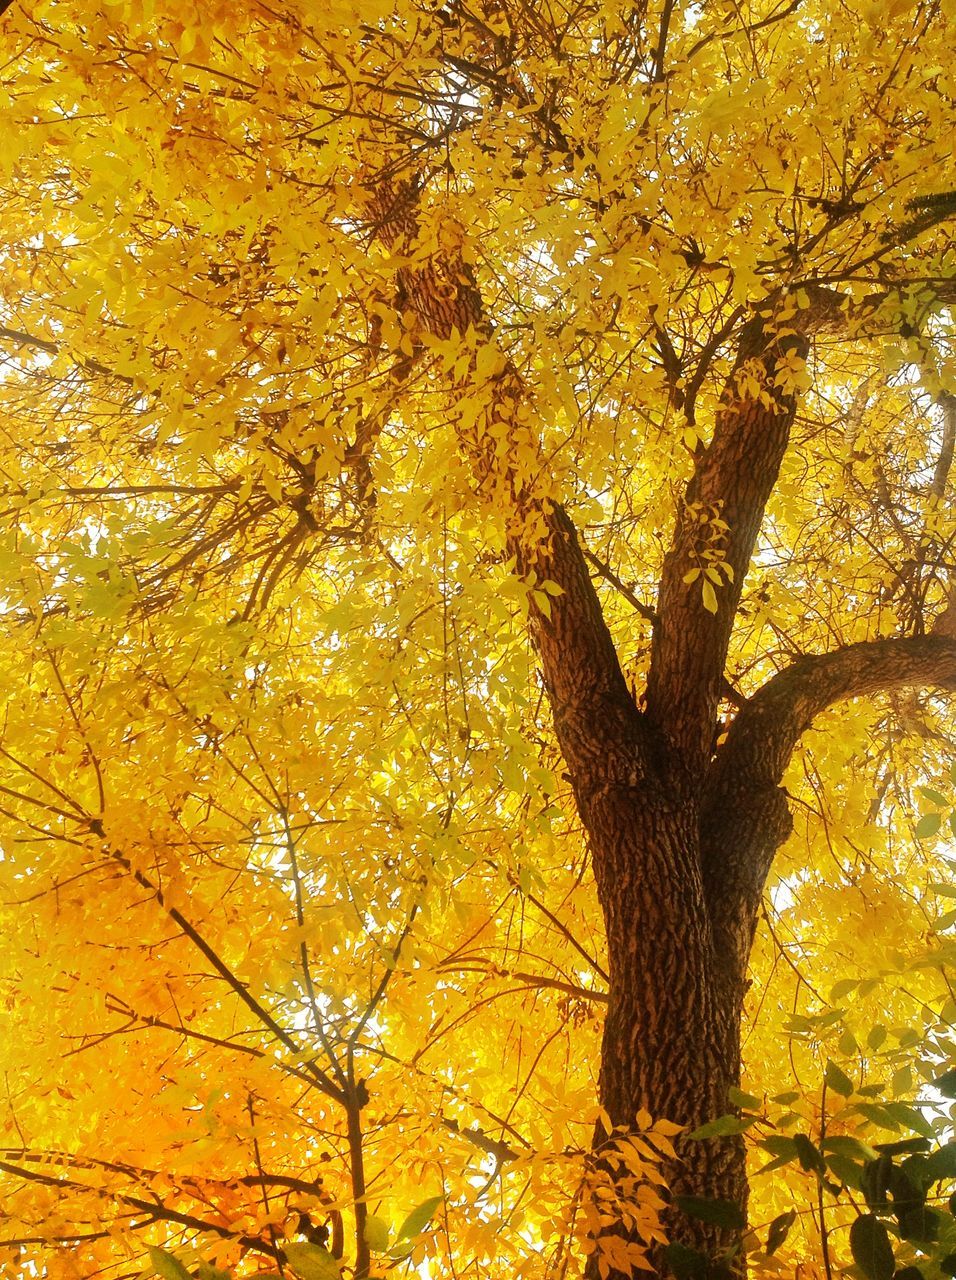 tree, yellow, low angle view, branch, autumn, growth, nature, change, beauty in nature, tree trunk, season, tranquility, full frame, scenics, backgrounds, orange color, leaf, outdoors, day, no people